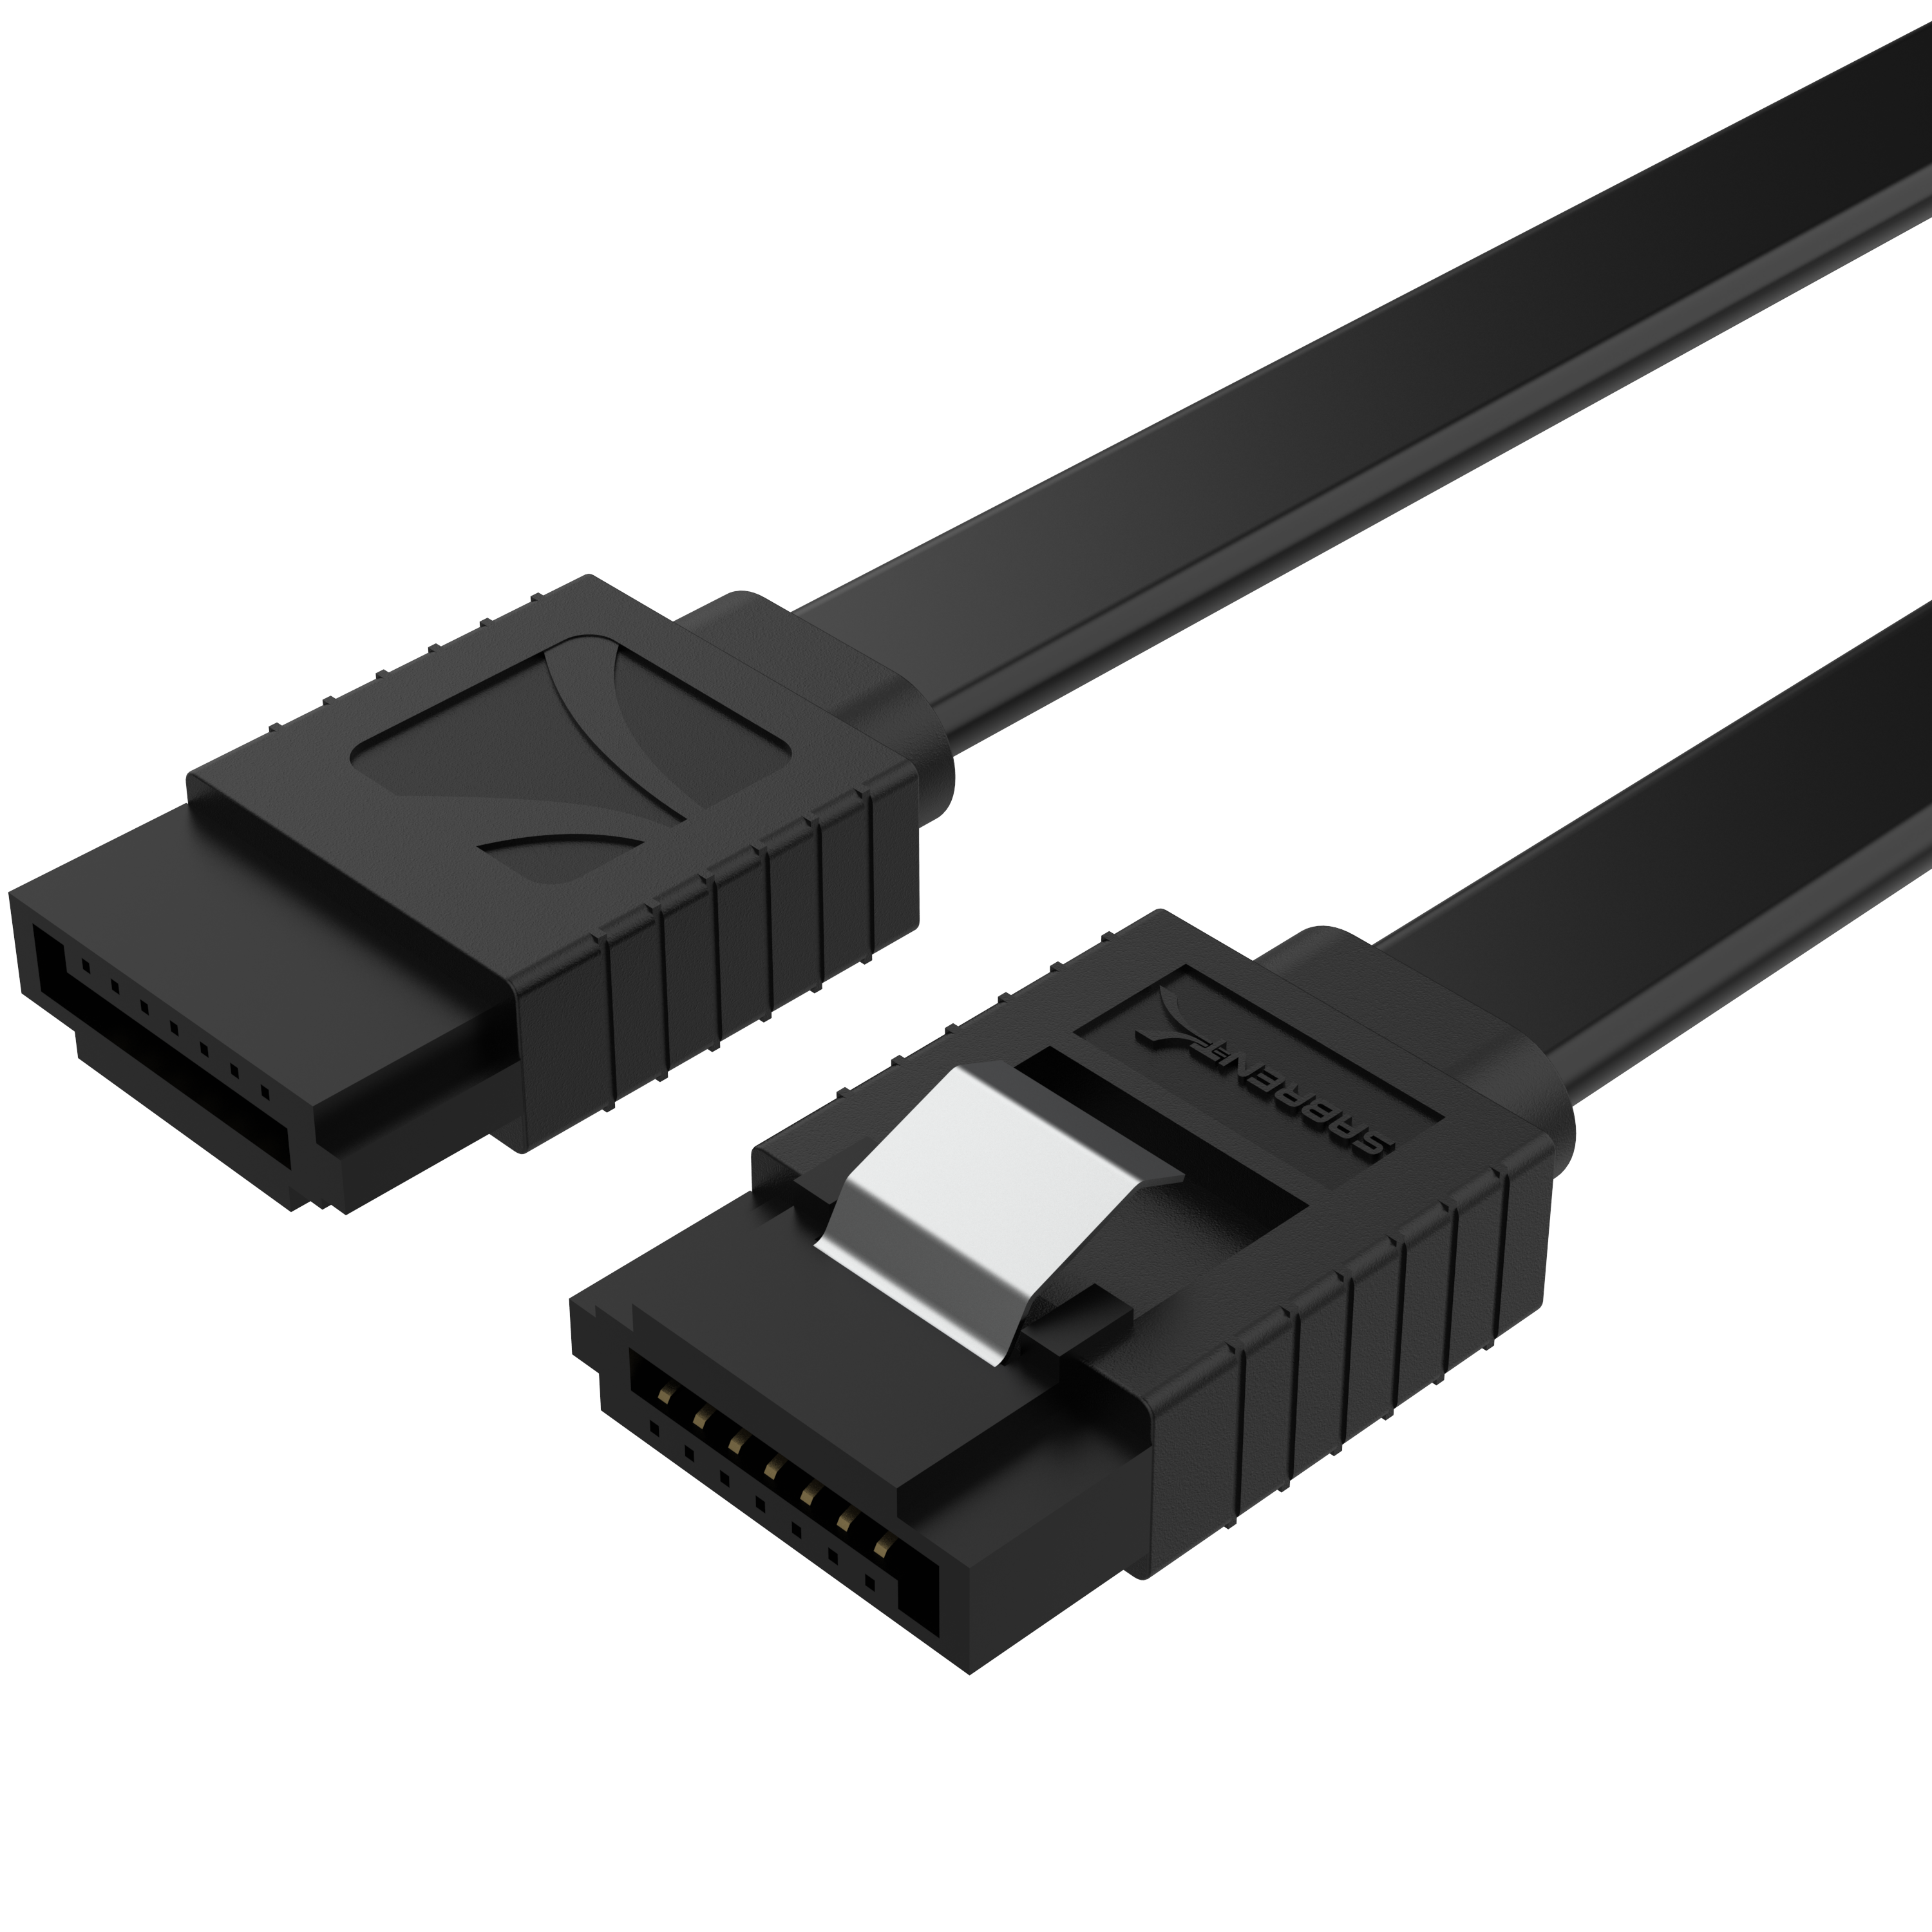 Sabrent 1.7' SATA III Data Cable with Locking Latch CB-SFK3 B&H